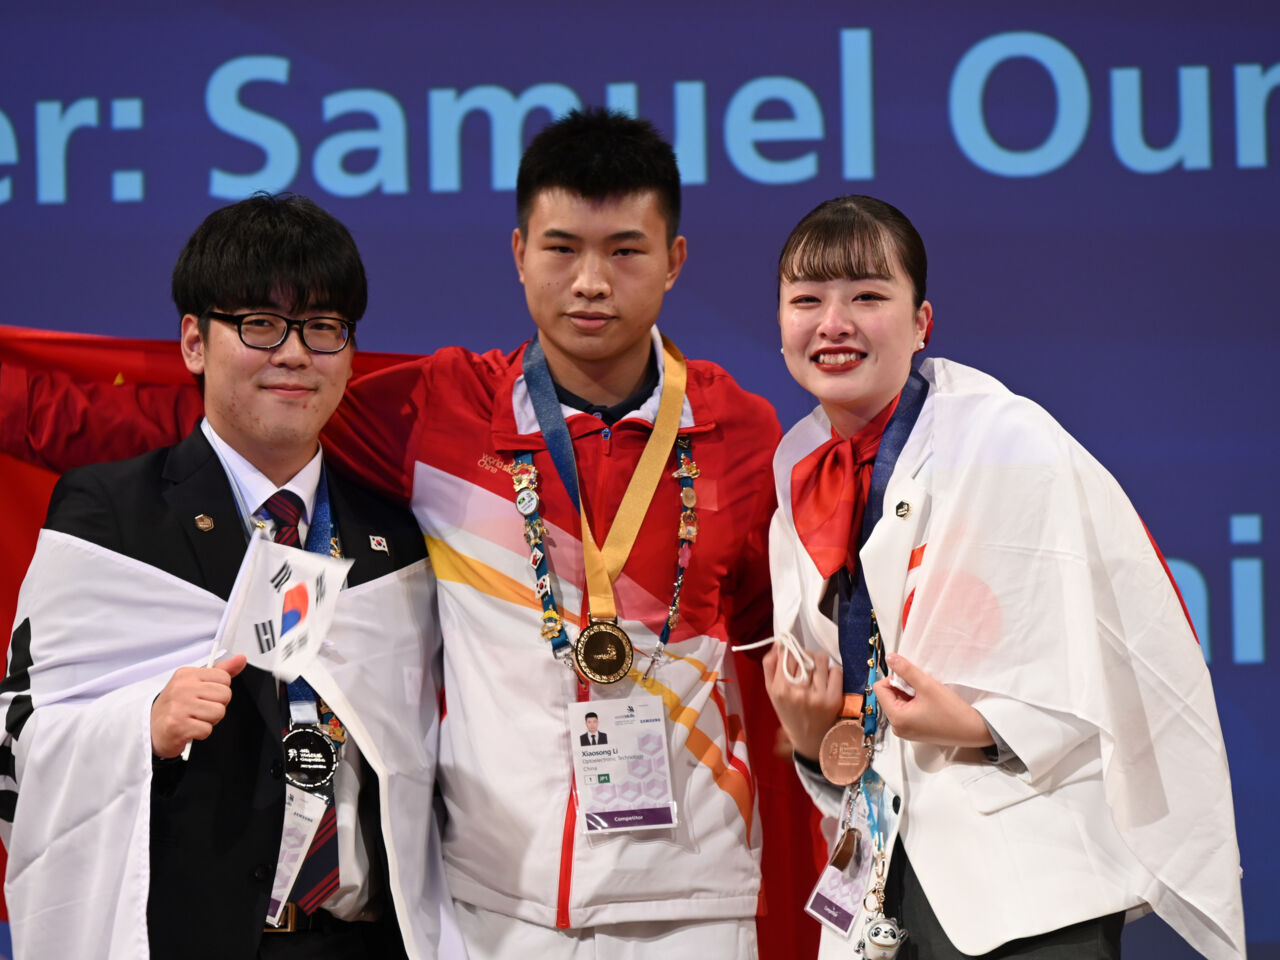 Nene Arai celebrates winning a bronze medal alongside fellow medal winners in Optoelectronic Technology at WorldSkills Competition 2022 Special Edition in Kyoto, Japan.